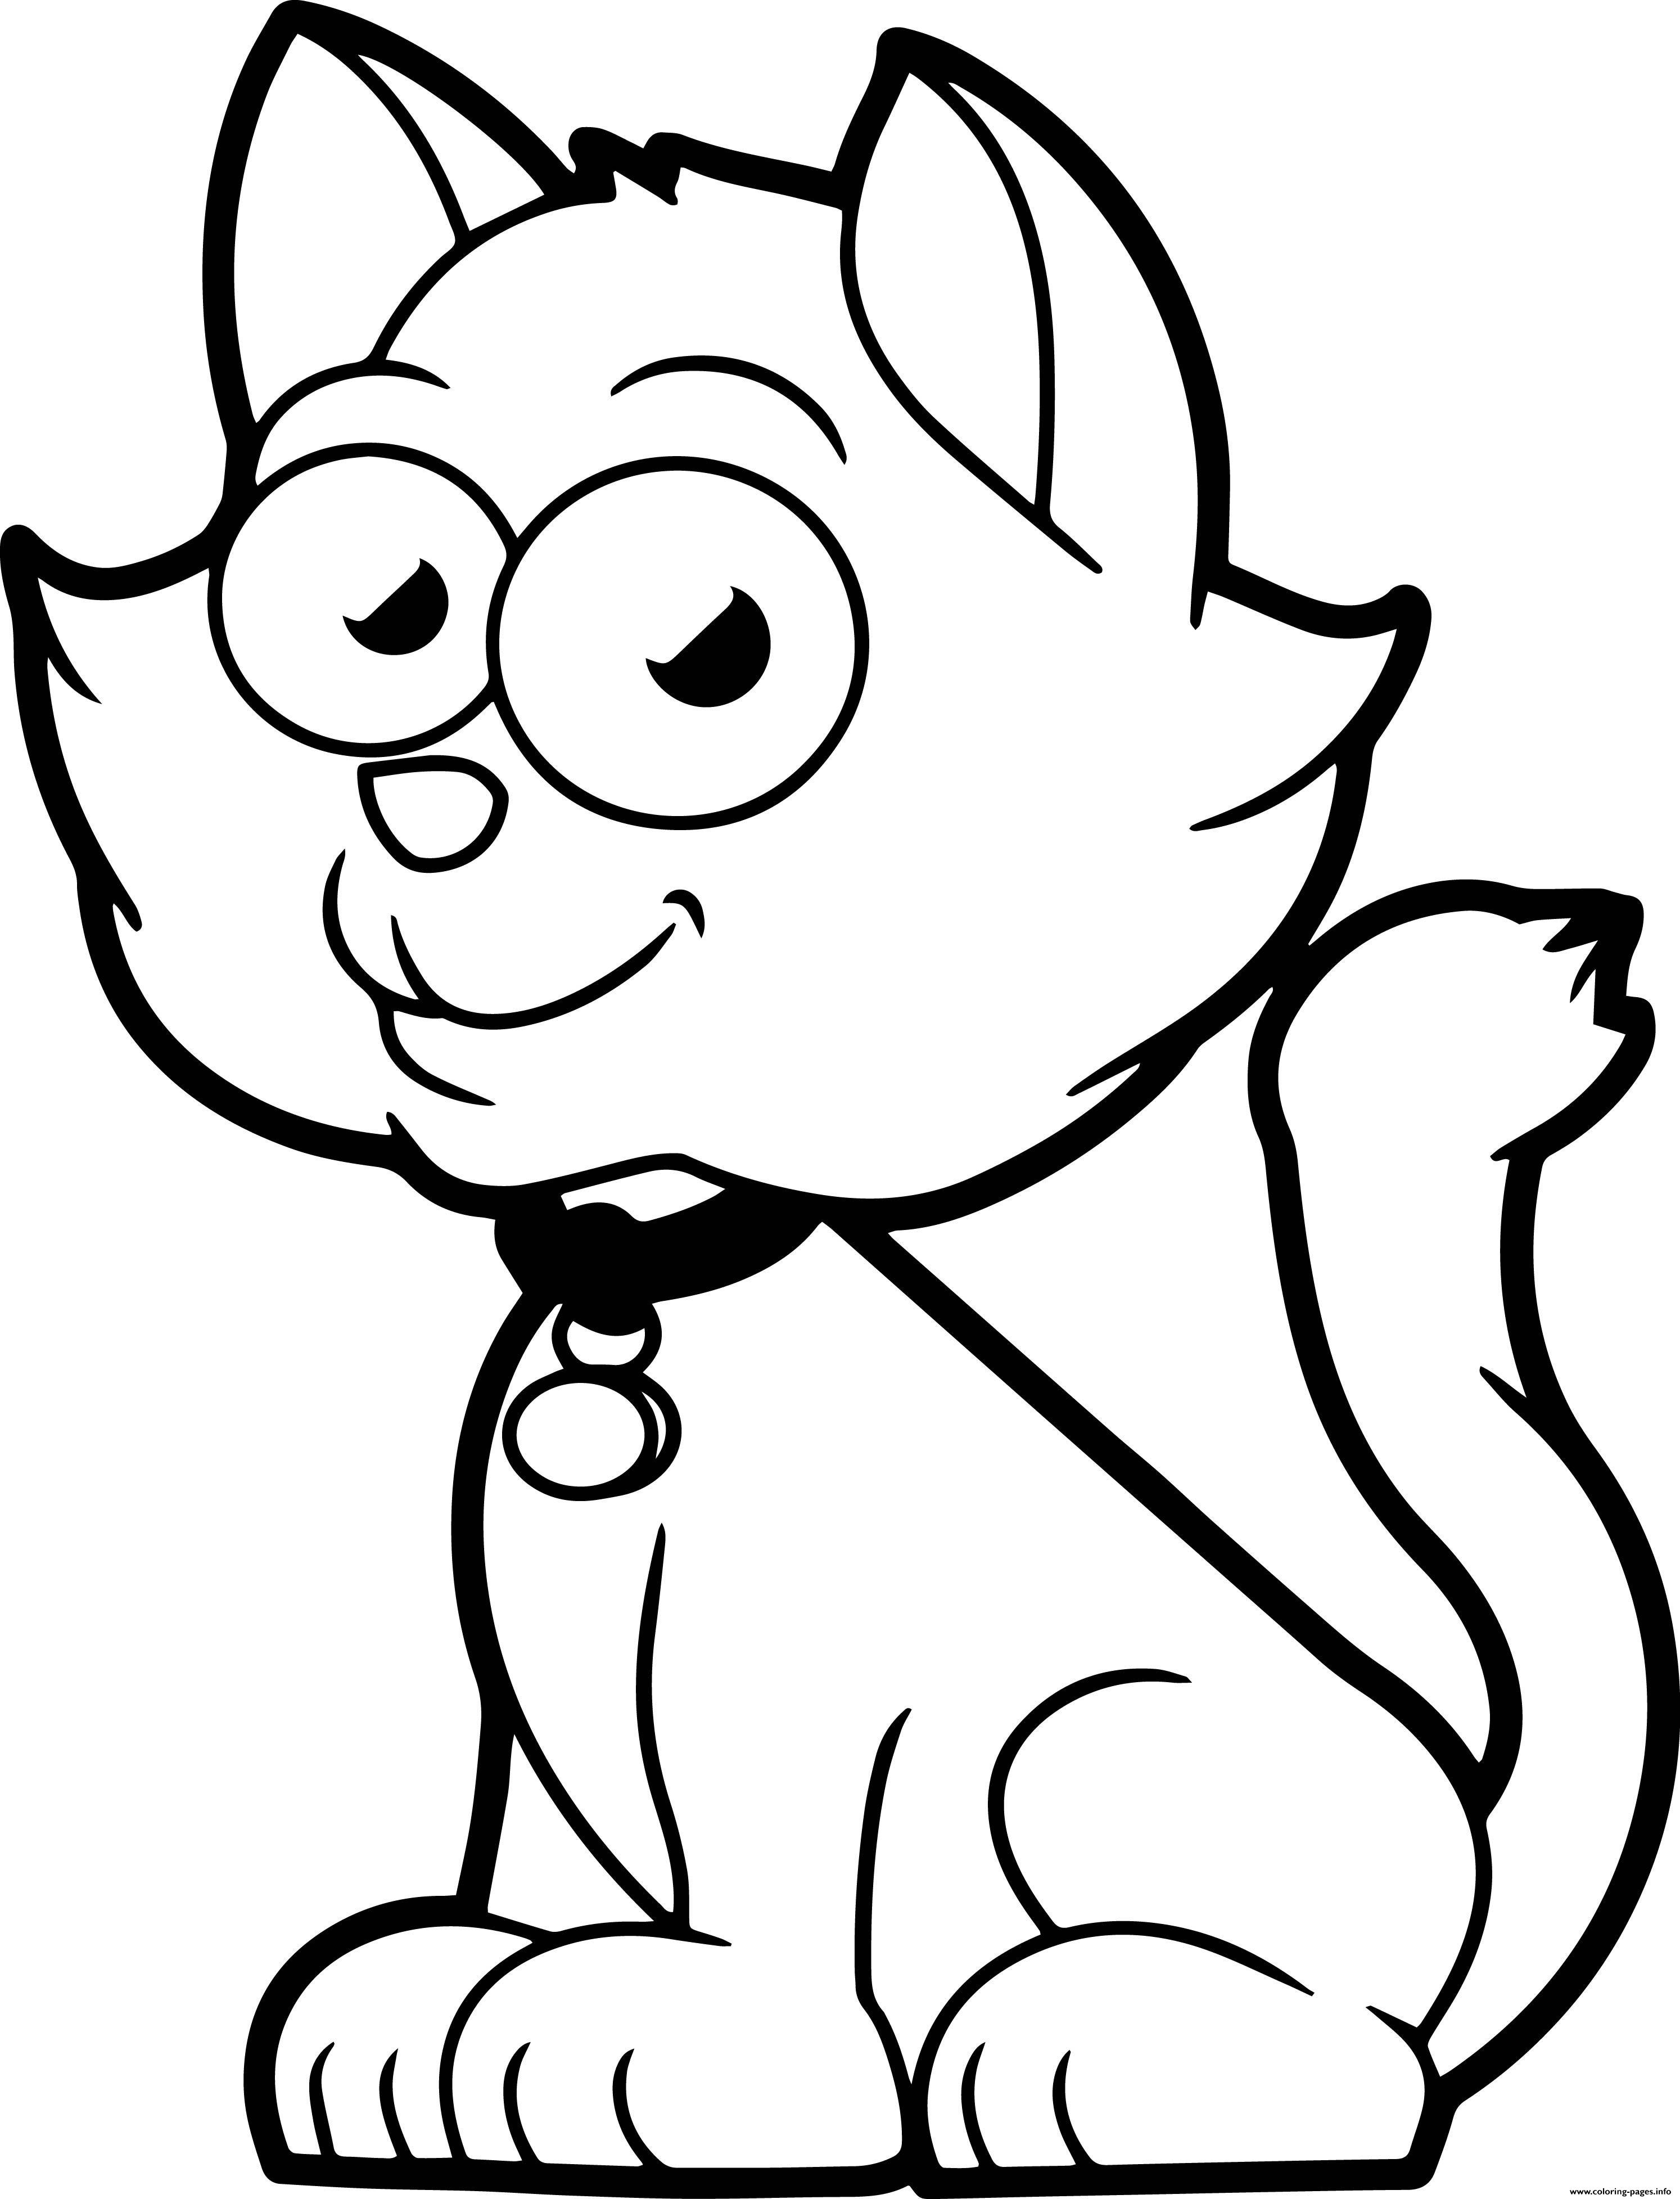 Download Cute Cartoon Cat Coloring Pages Printable